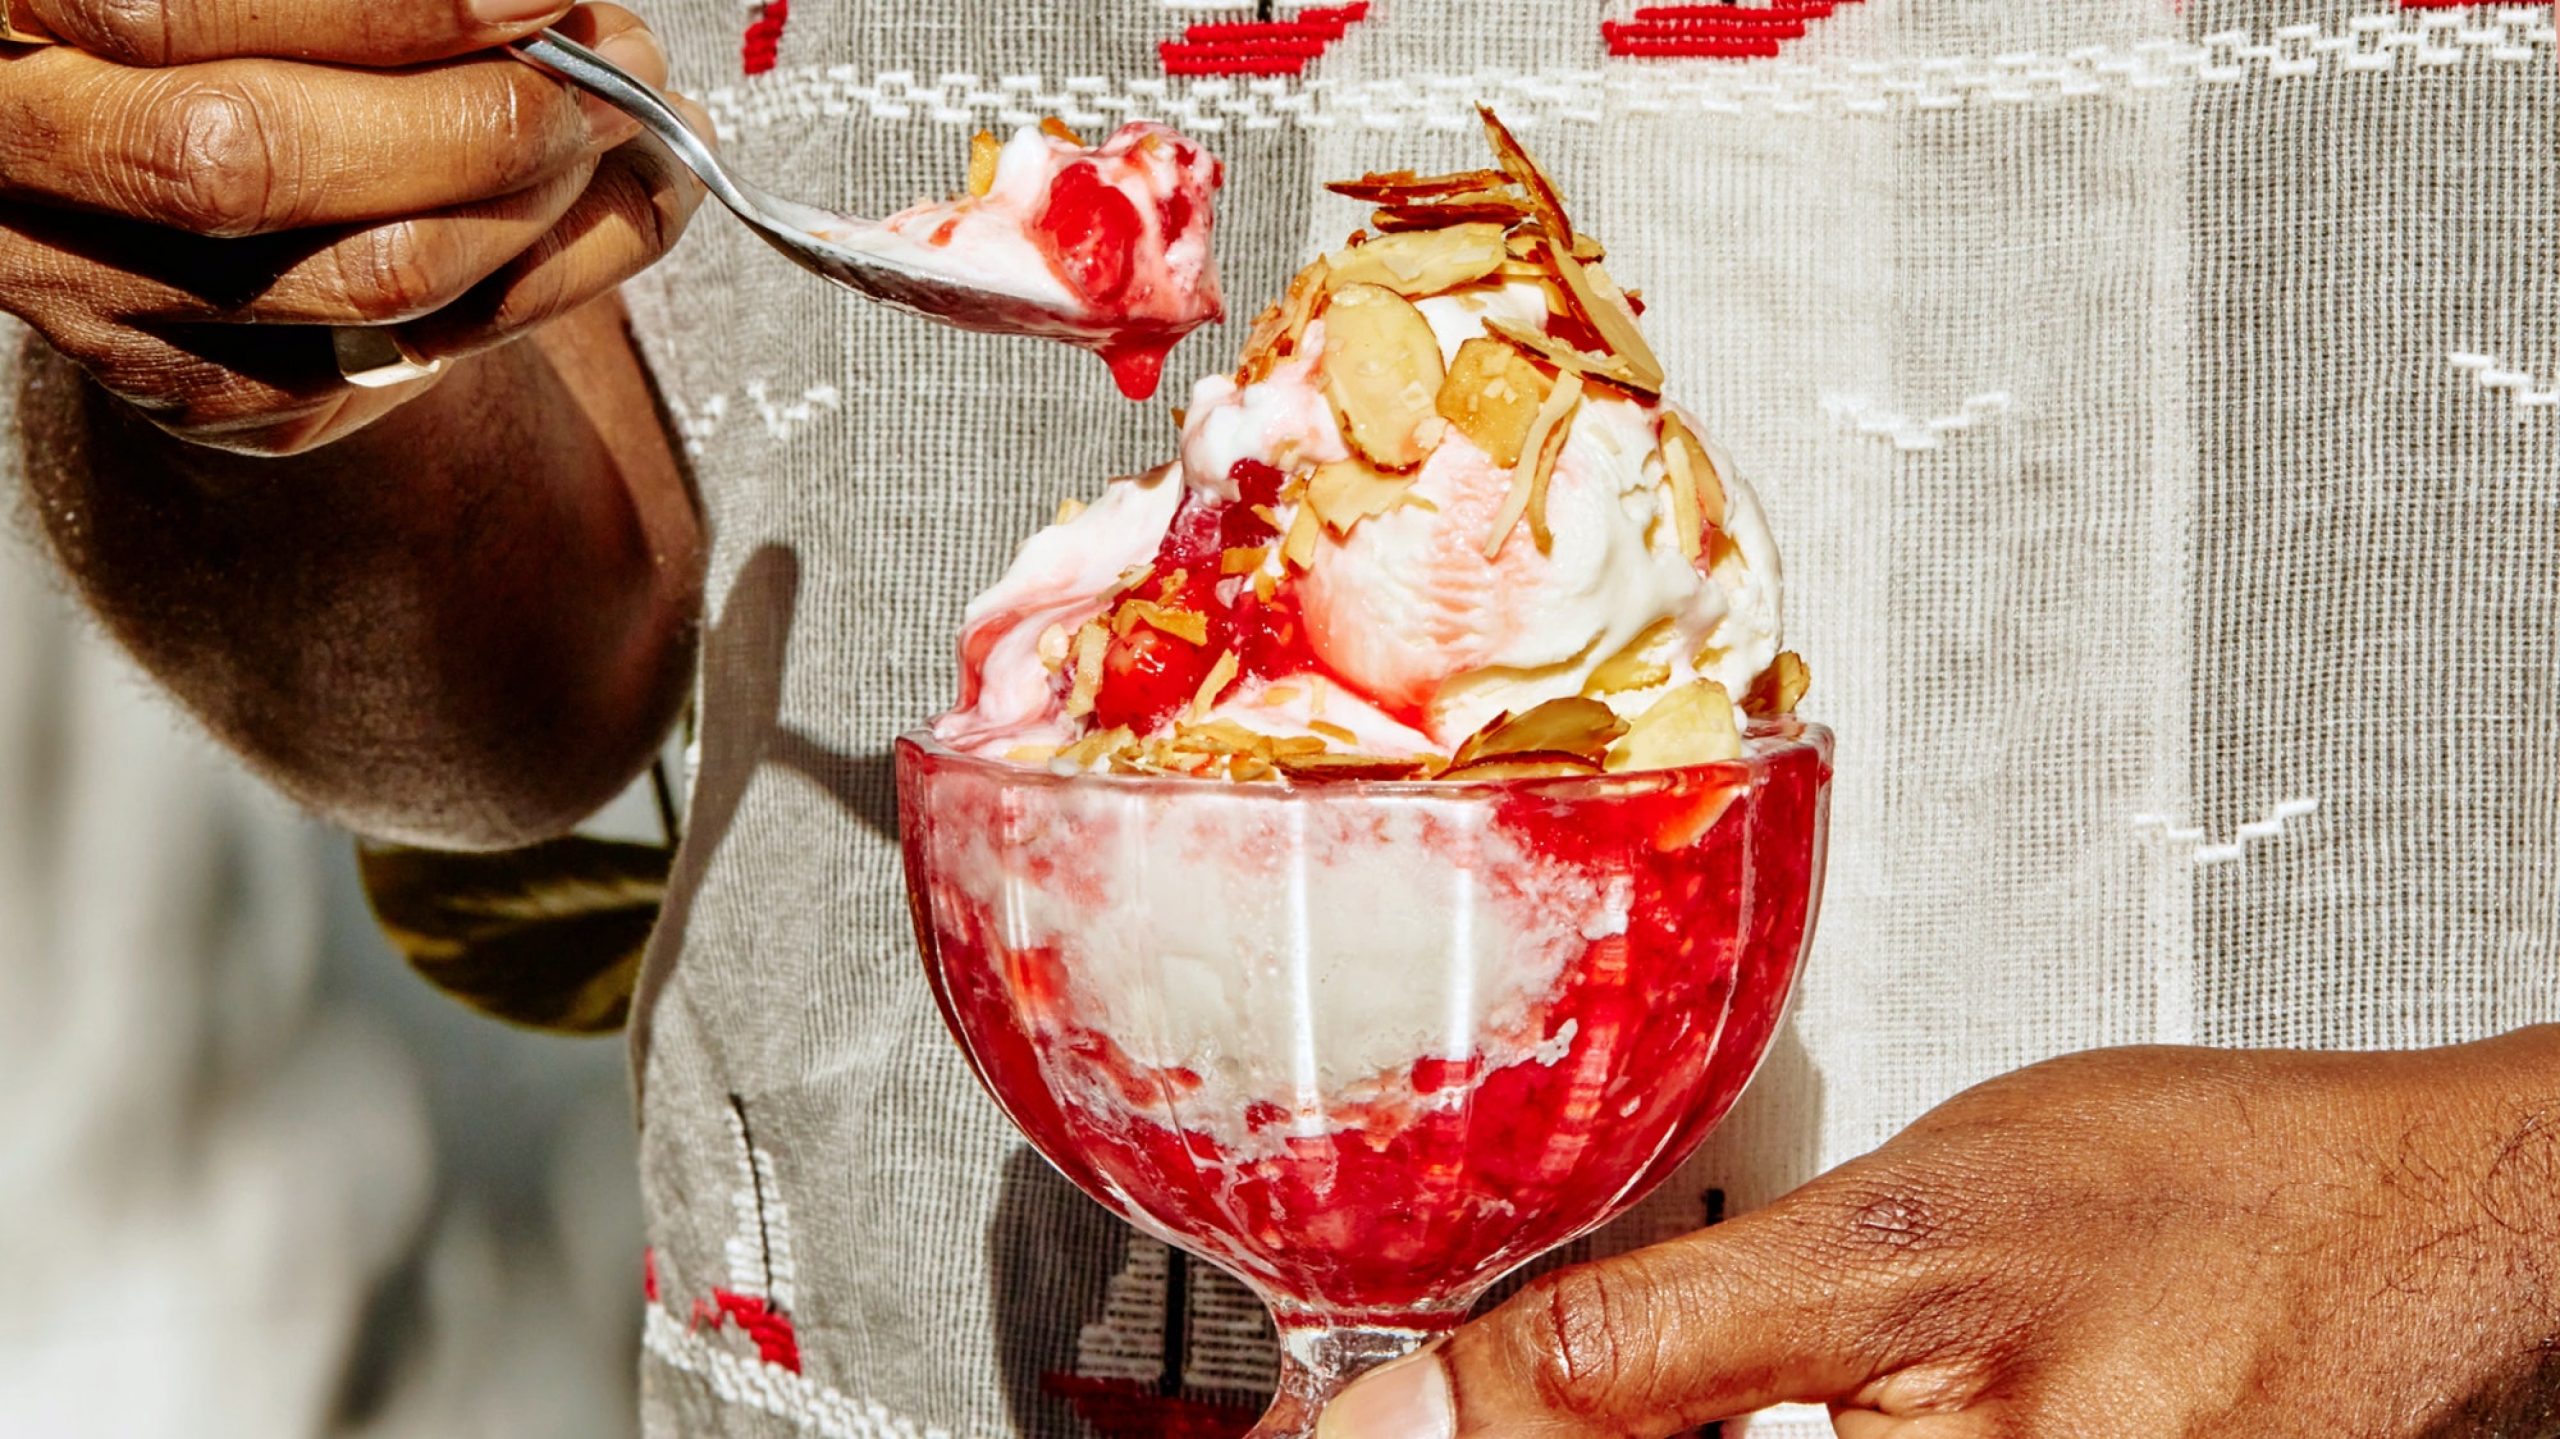 This Summer, Have Your Sundae and Eat it Too